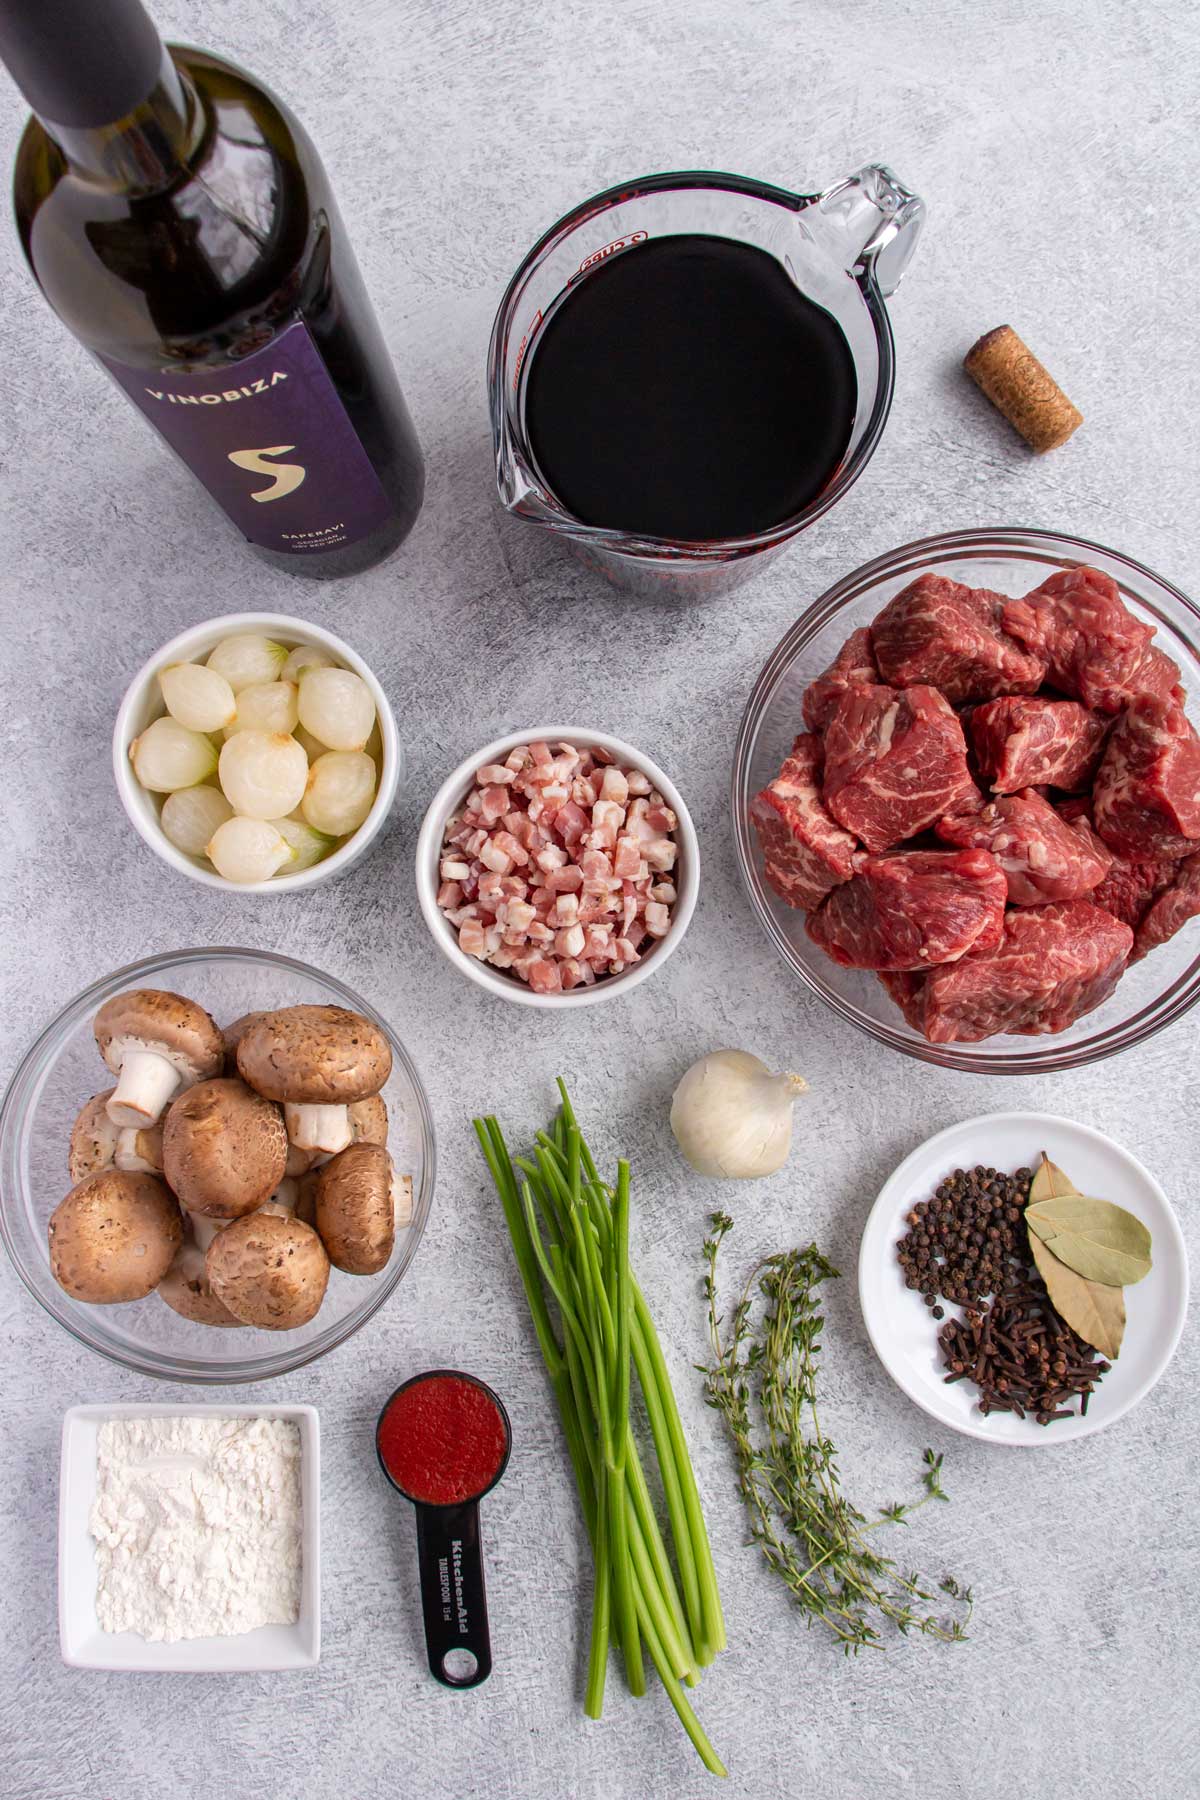 Ingredients for burgundy beef stew on a grey background.